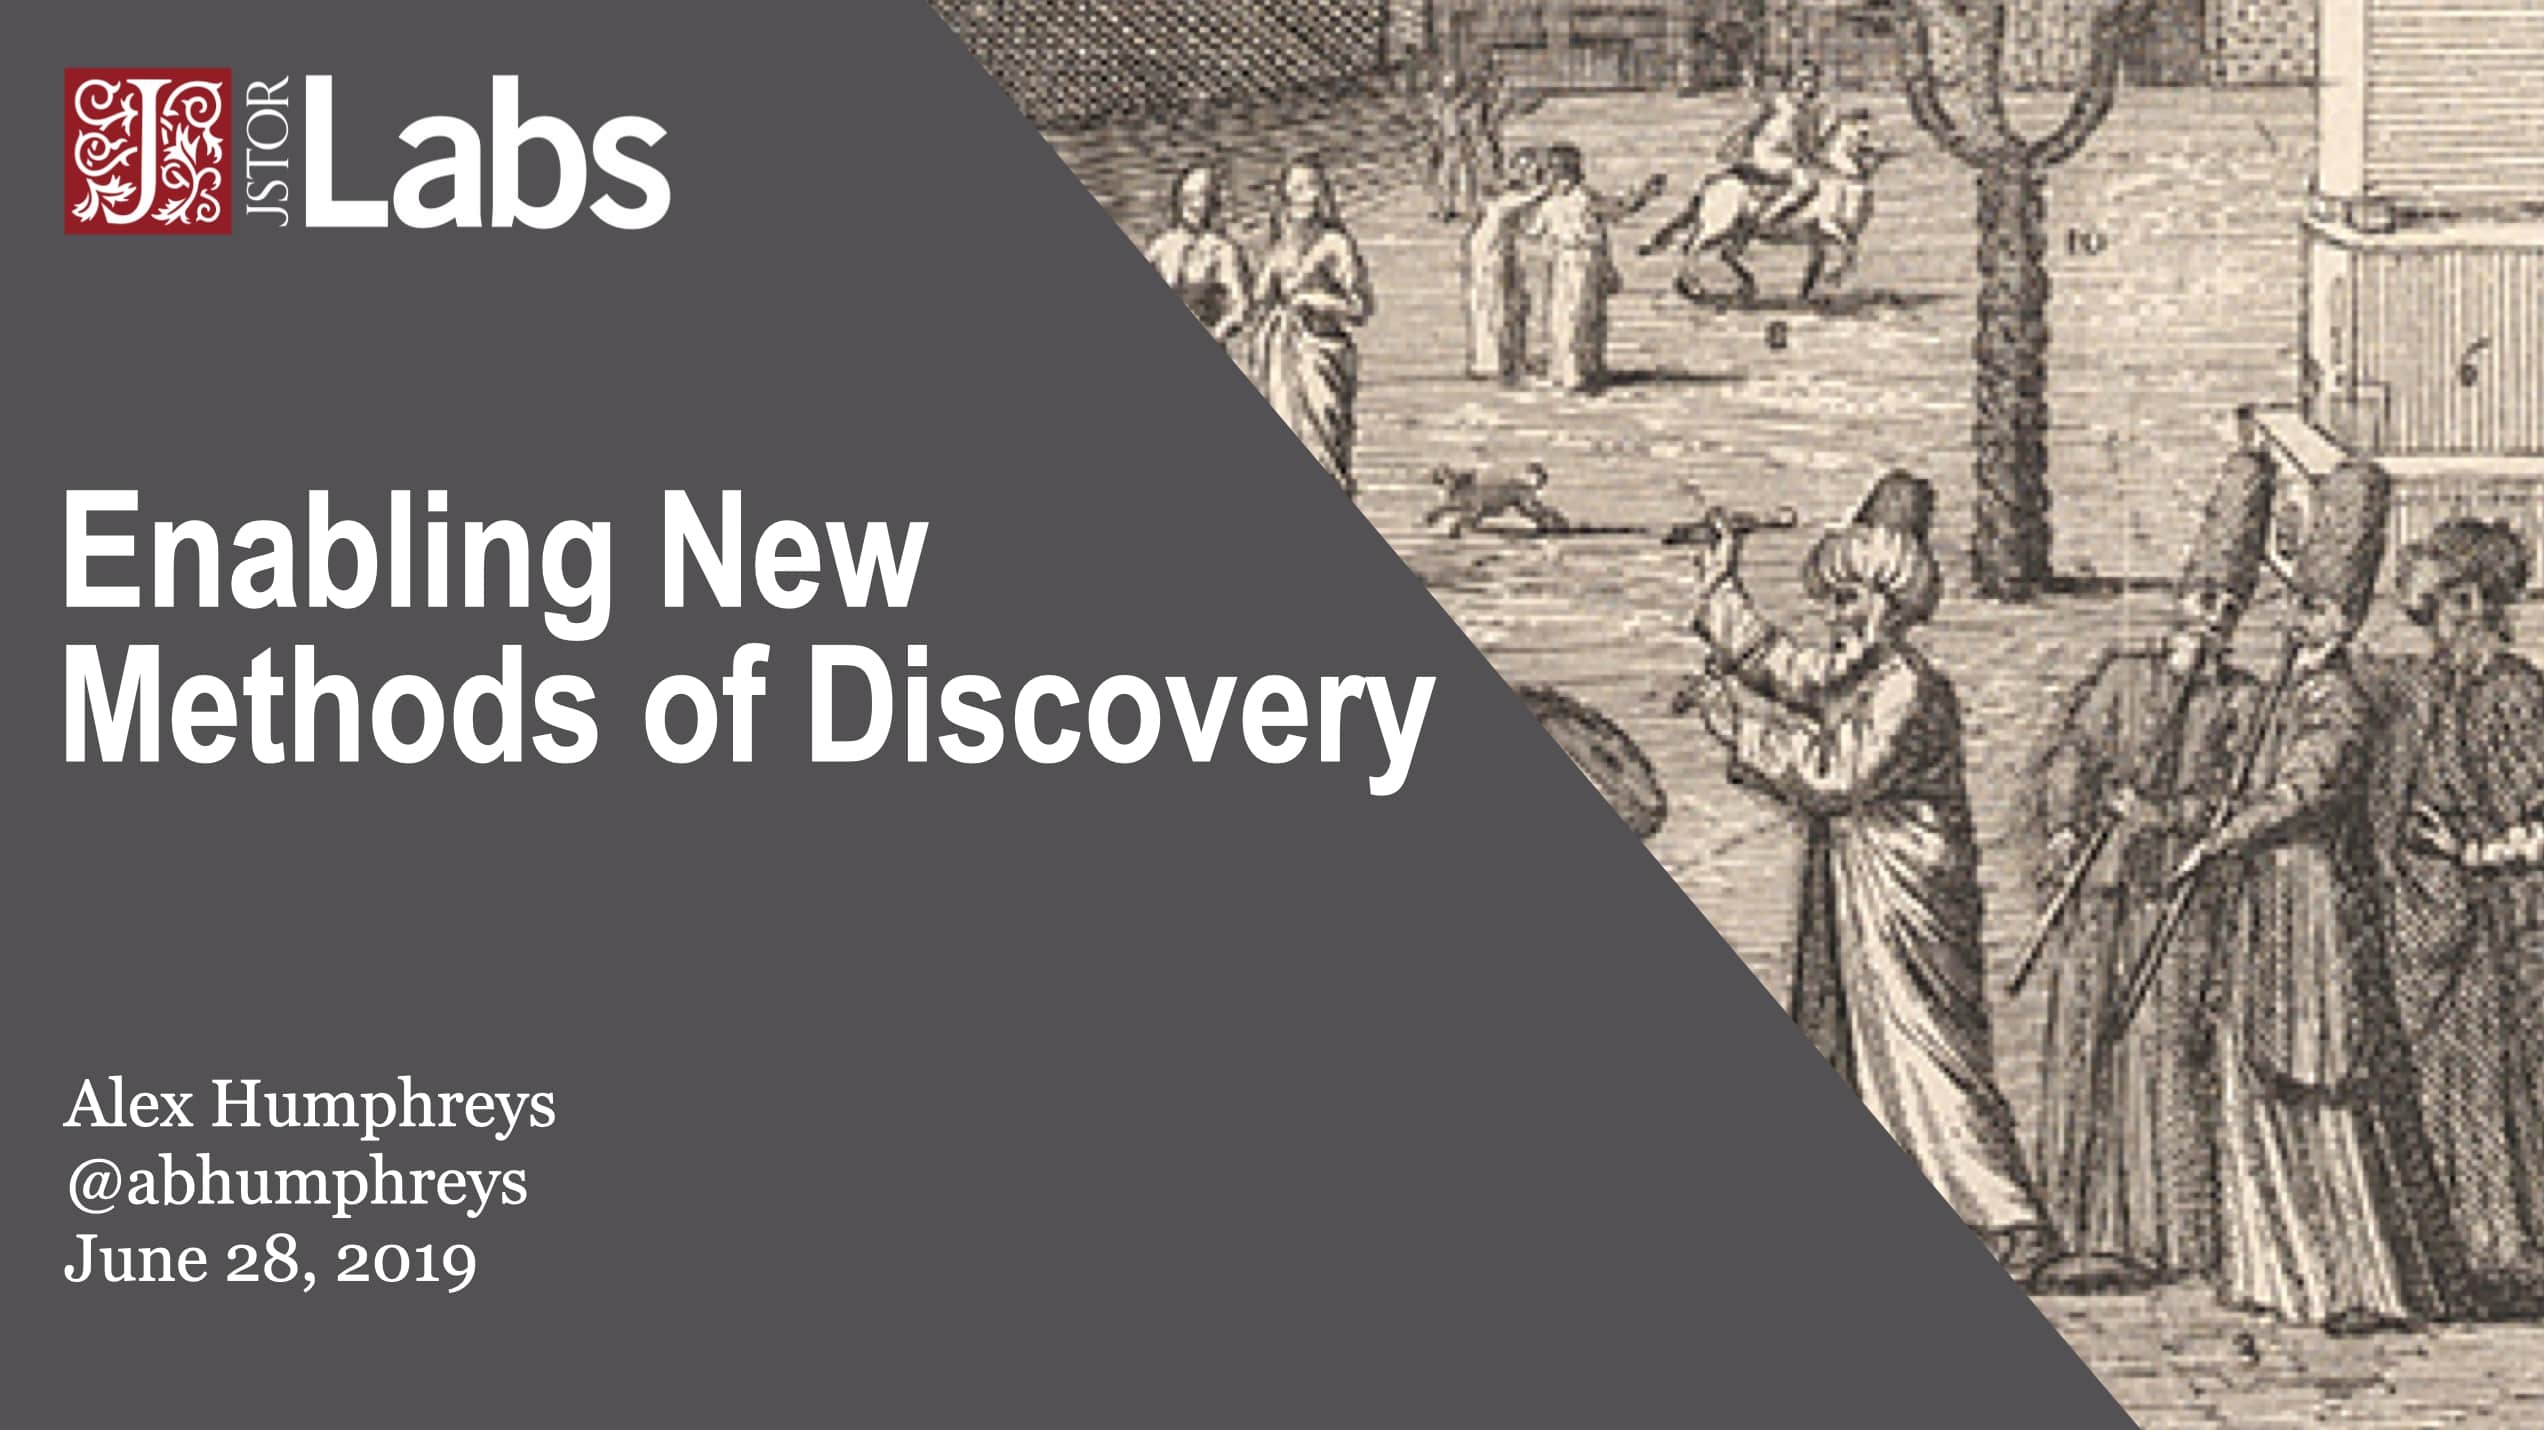 Enabling New Methods of Discovery